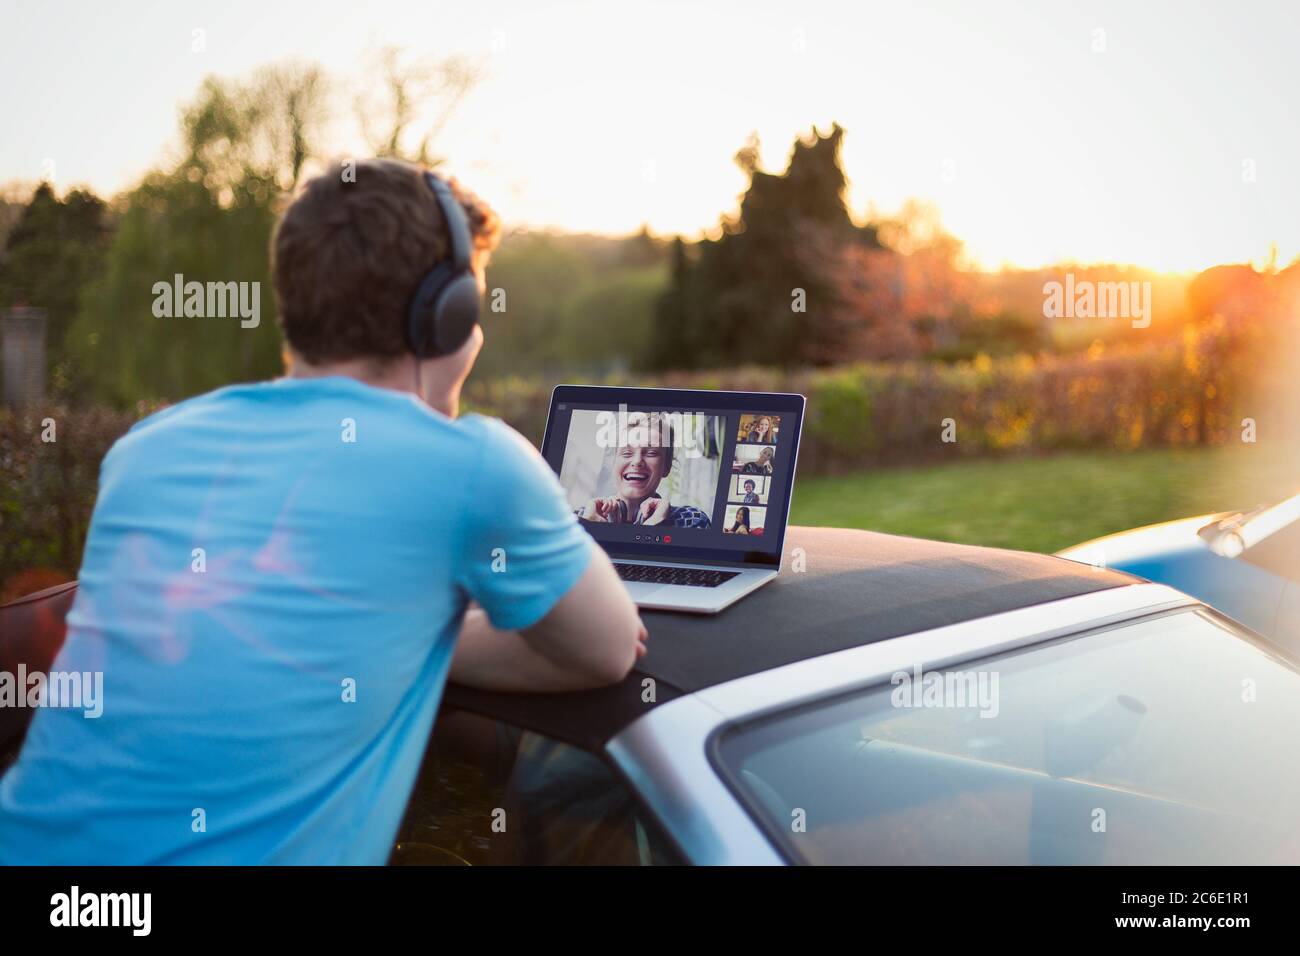 Man with headphones and laptop video chatting with friends on car roof Stock Photo